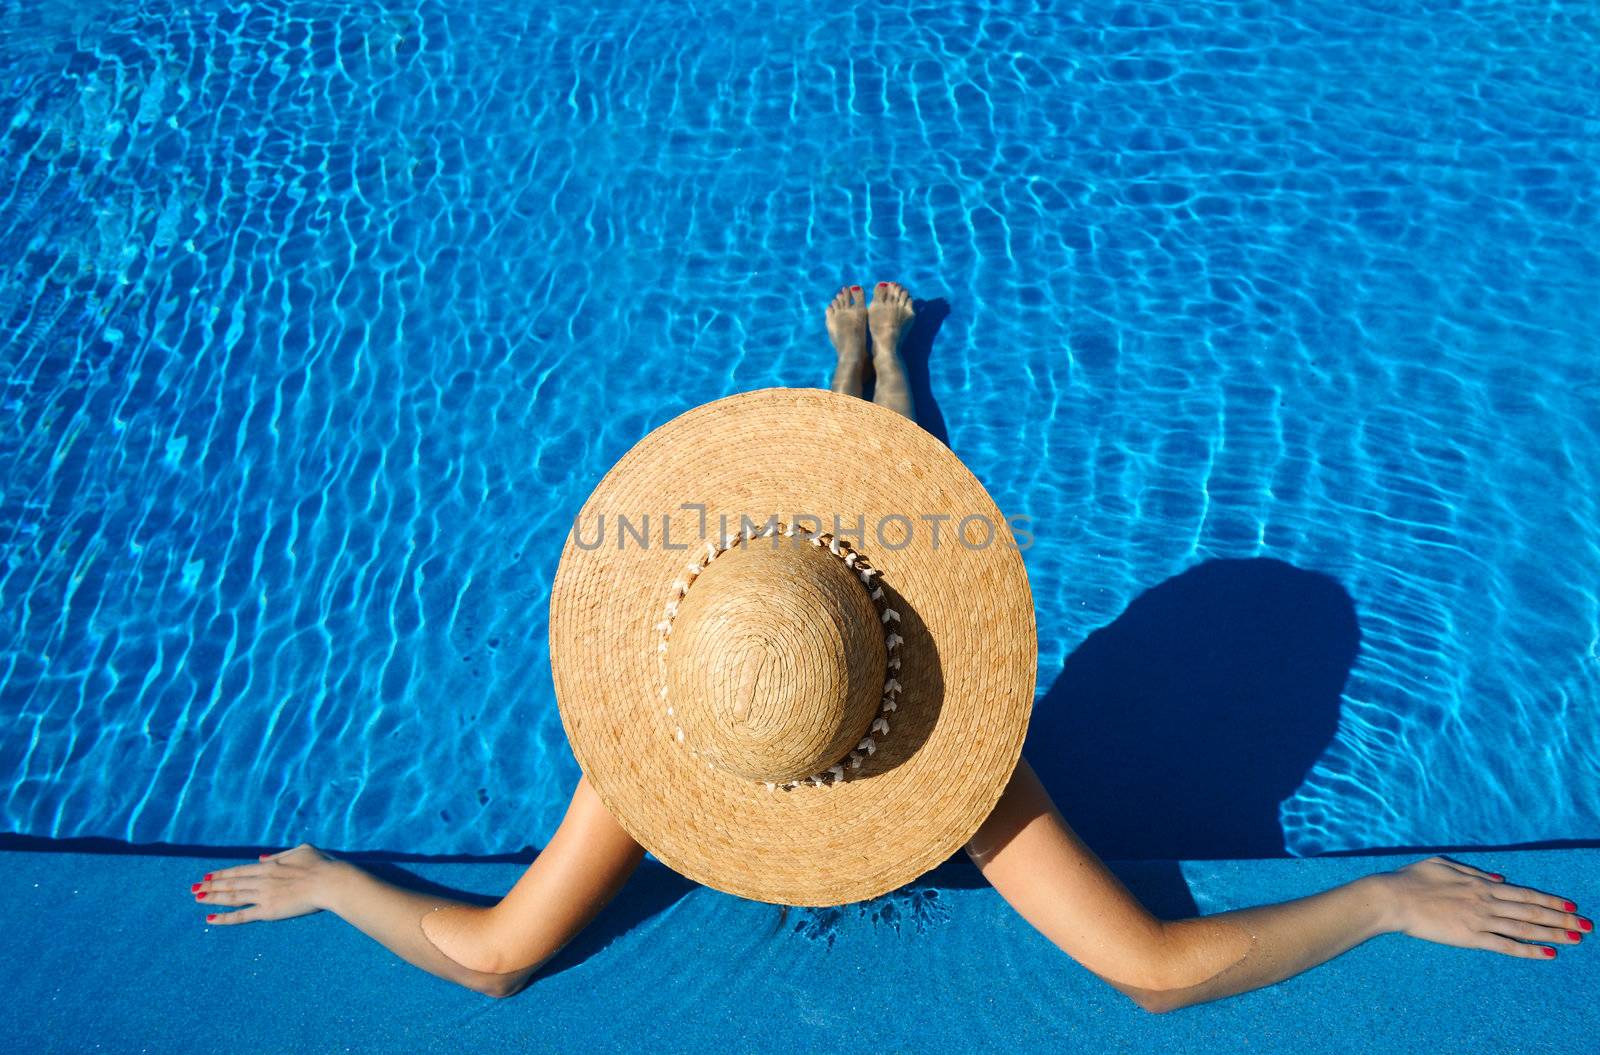 Woman at poolside by haveseen